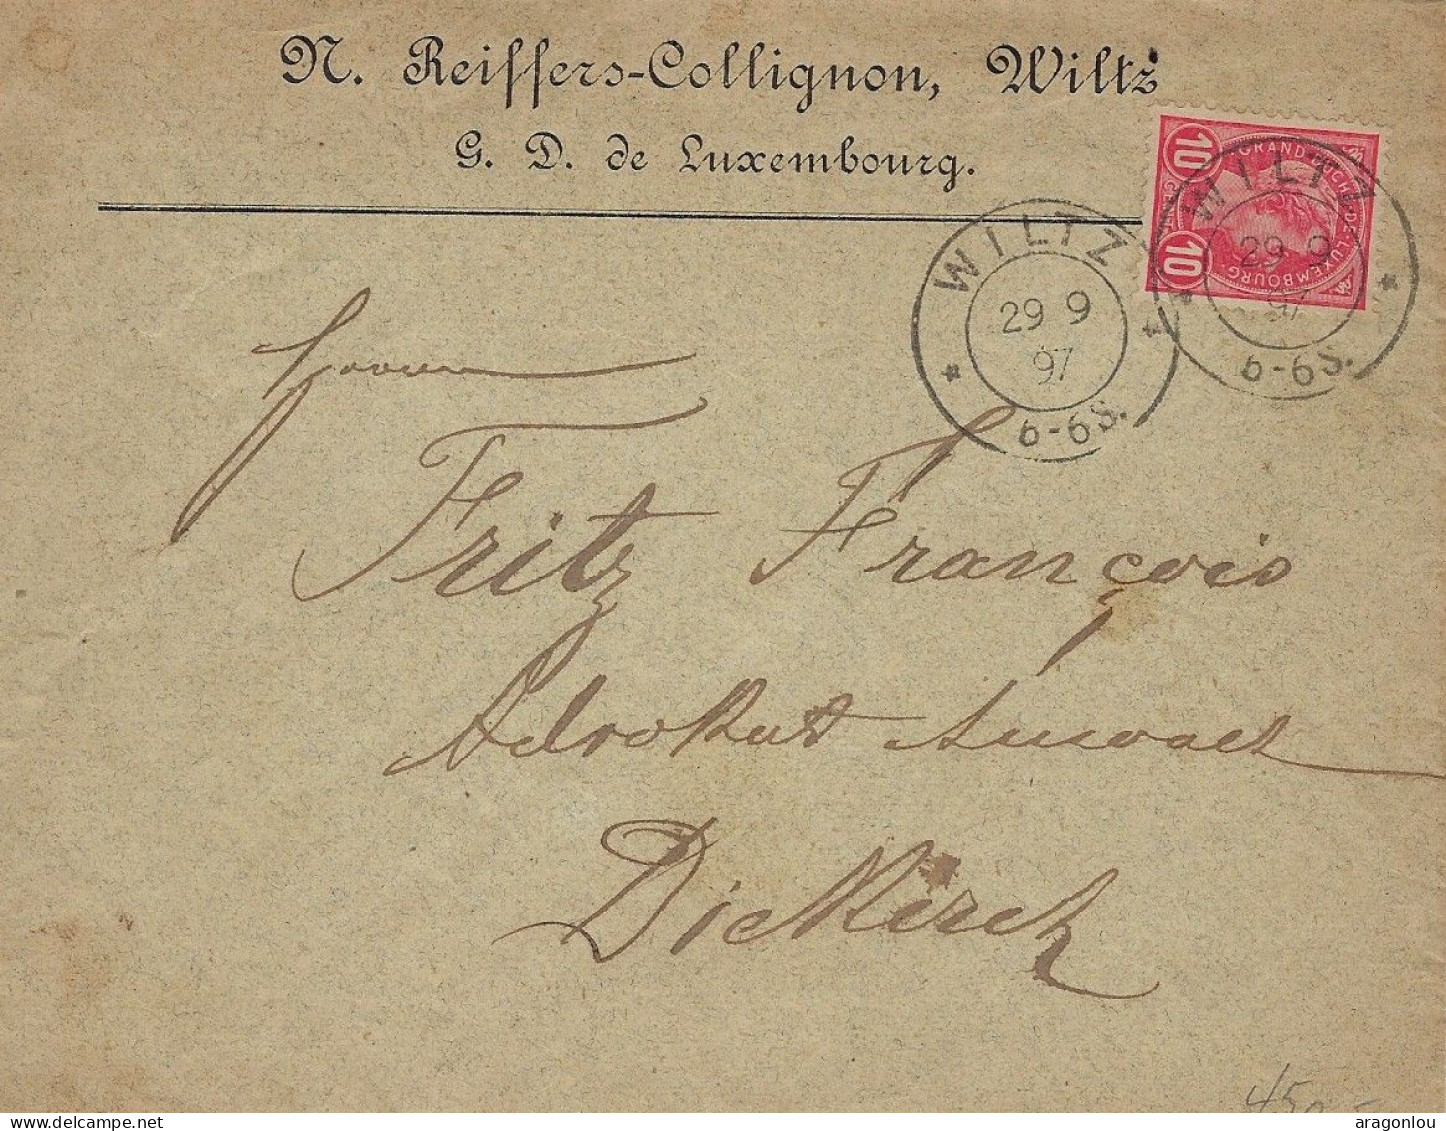 Luxembourg - Luxemburg - Lettre   1897   Adolphe    N. Reiffers - Collignon , Wiltz - 1891 Adolphe Frontansicht